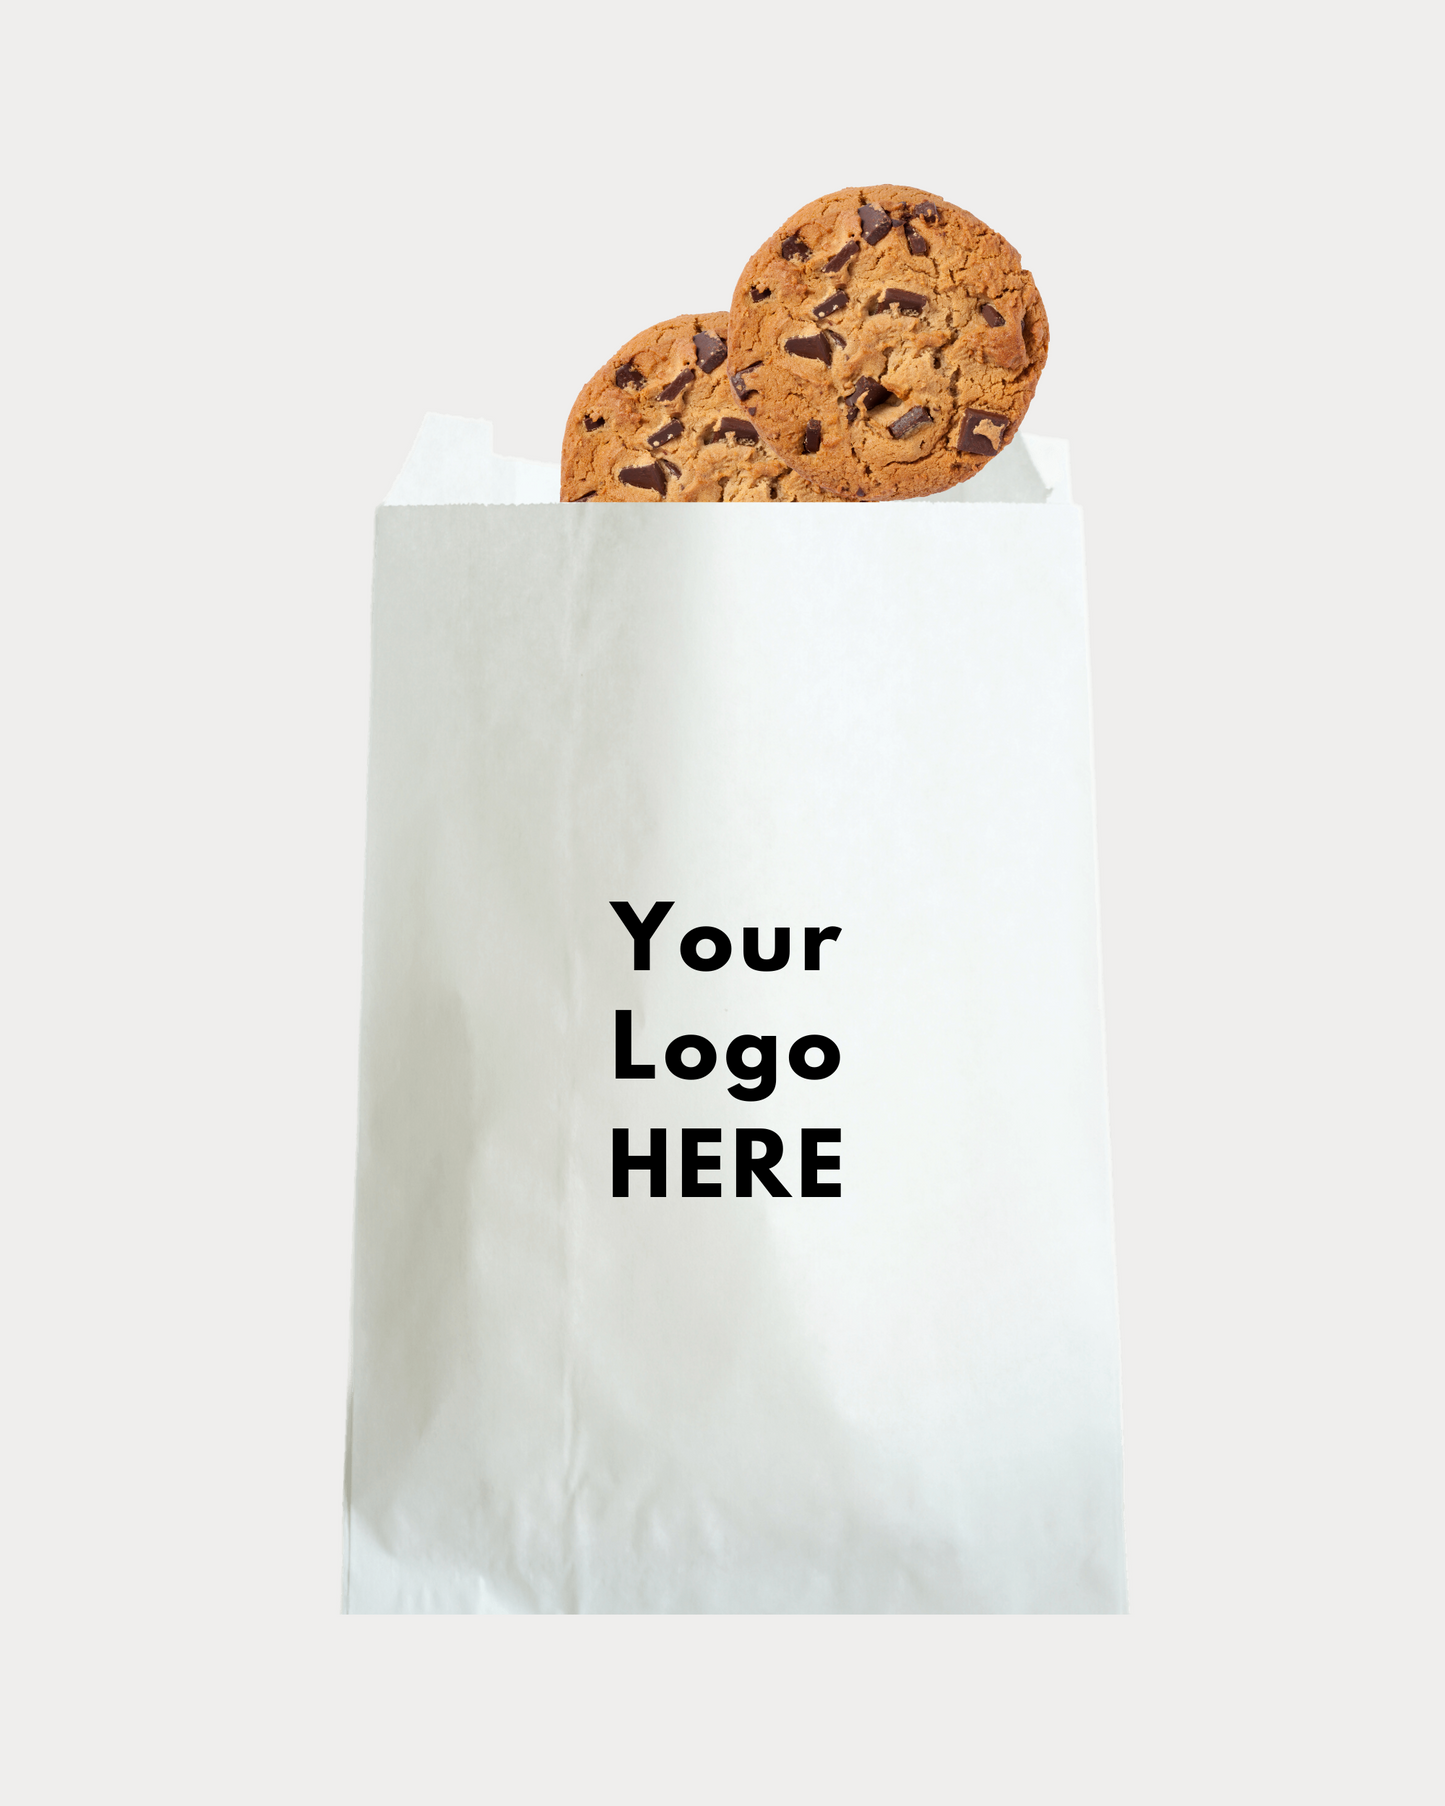 Custom party gift bags with your business logo! These professional, grease-proof, durable paper bags make great company party packaging, adding a nice touch to your event. A sweet reminder they won't forget!